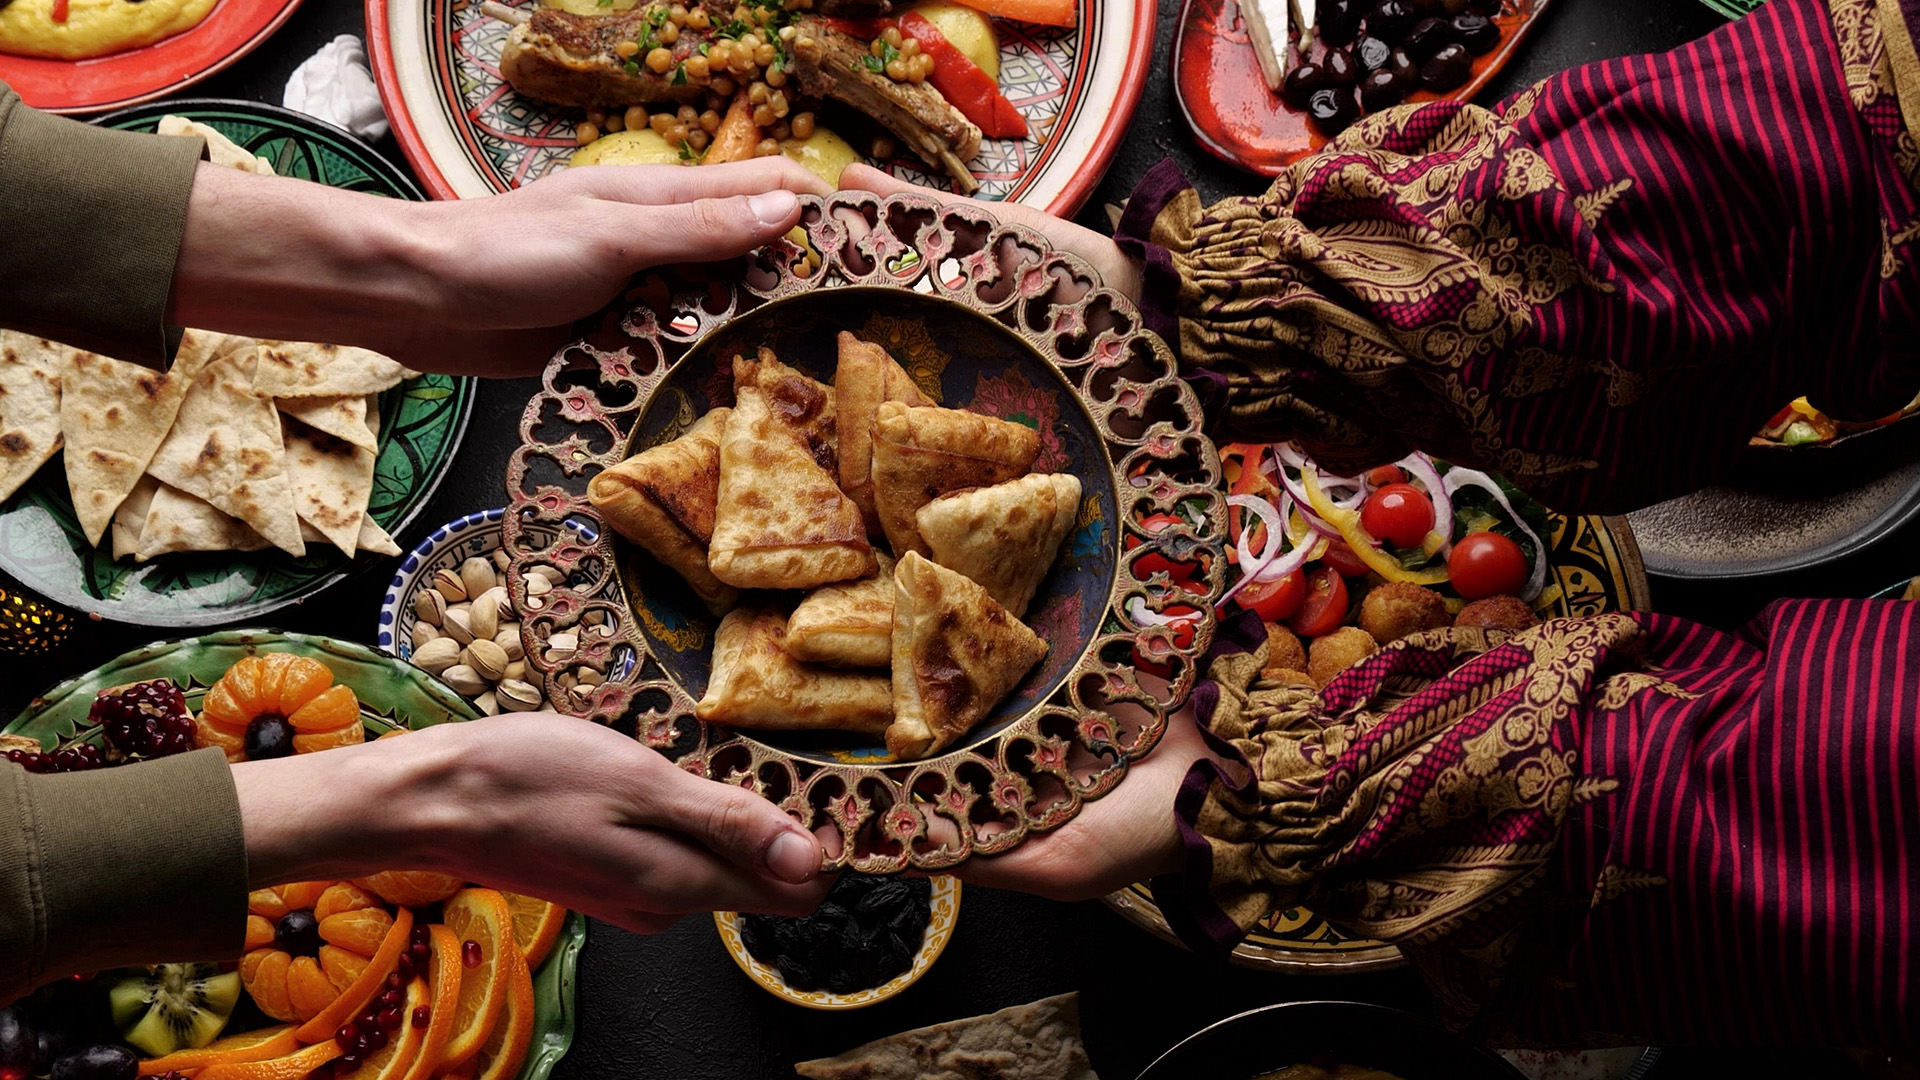 The Land of Rice, Meat, and Spices: 13 Regional Dishes of Saudi Arabia